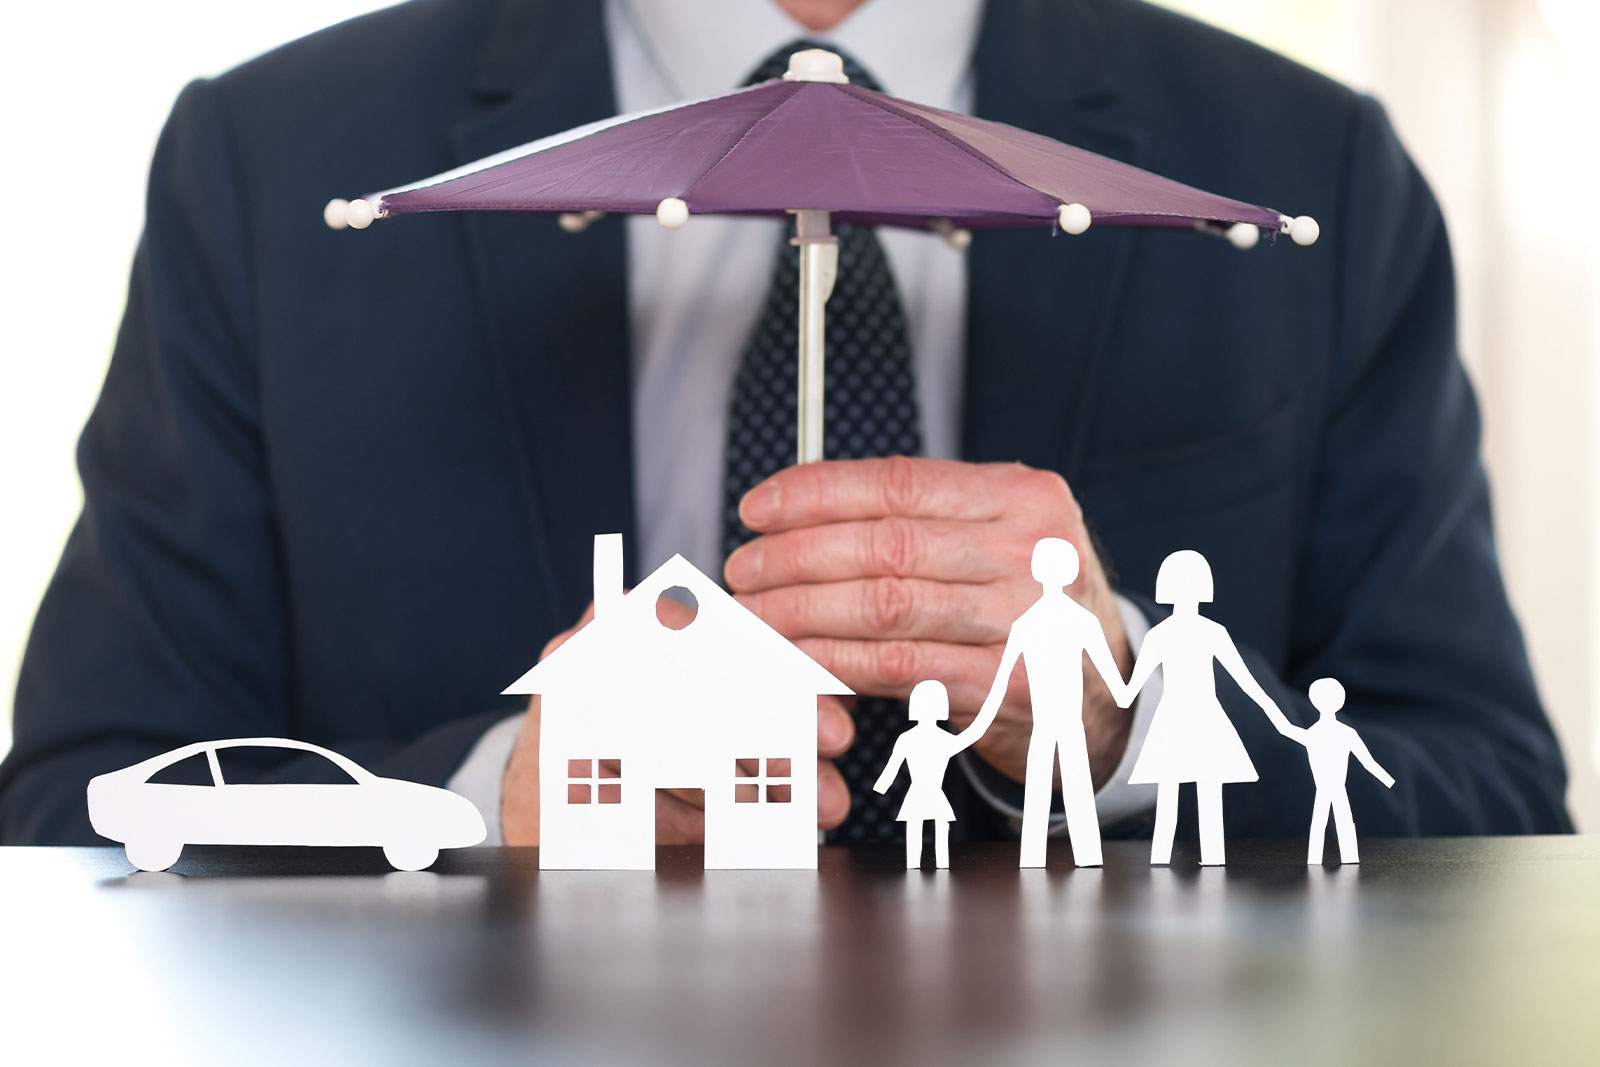 Image of man holding small umbrella over paper cut out a house, care, and family